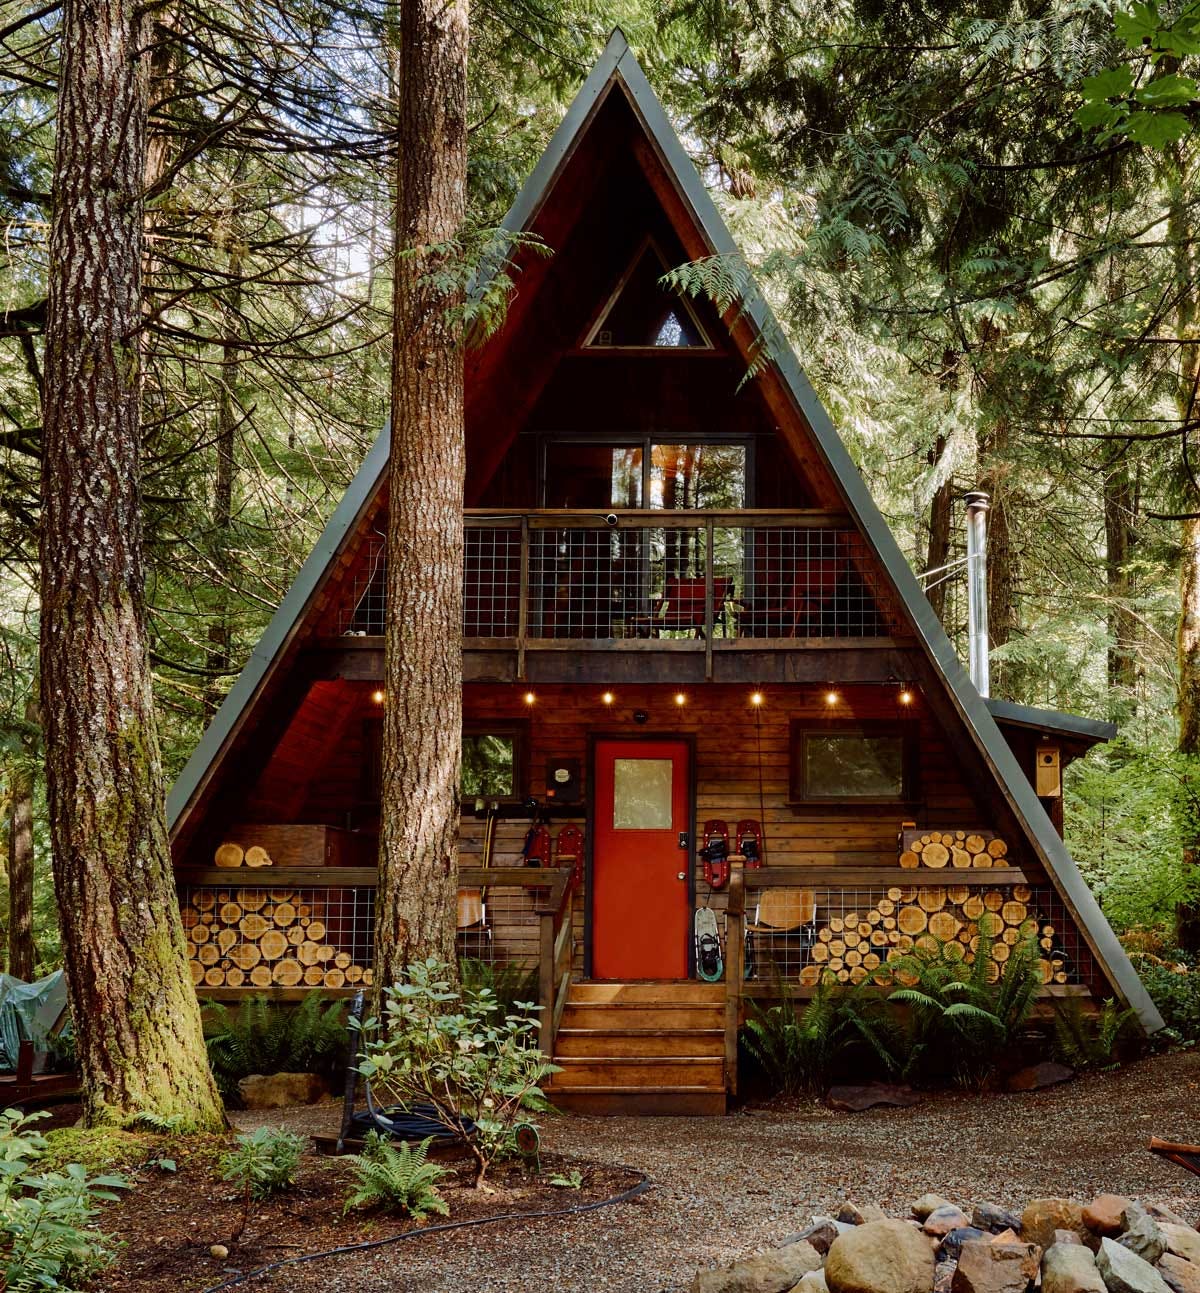 7 Spectacular A-Frame Airbnb Homes You Can Stay In | by Ashlea Halpern |  Airbnb Magazine | Medium